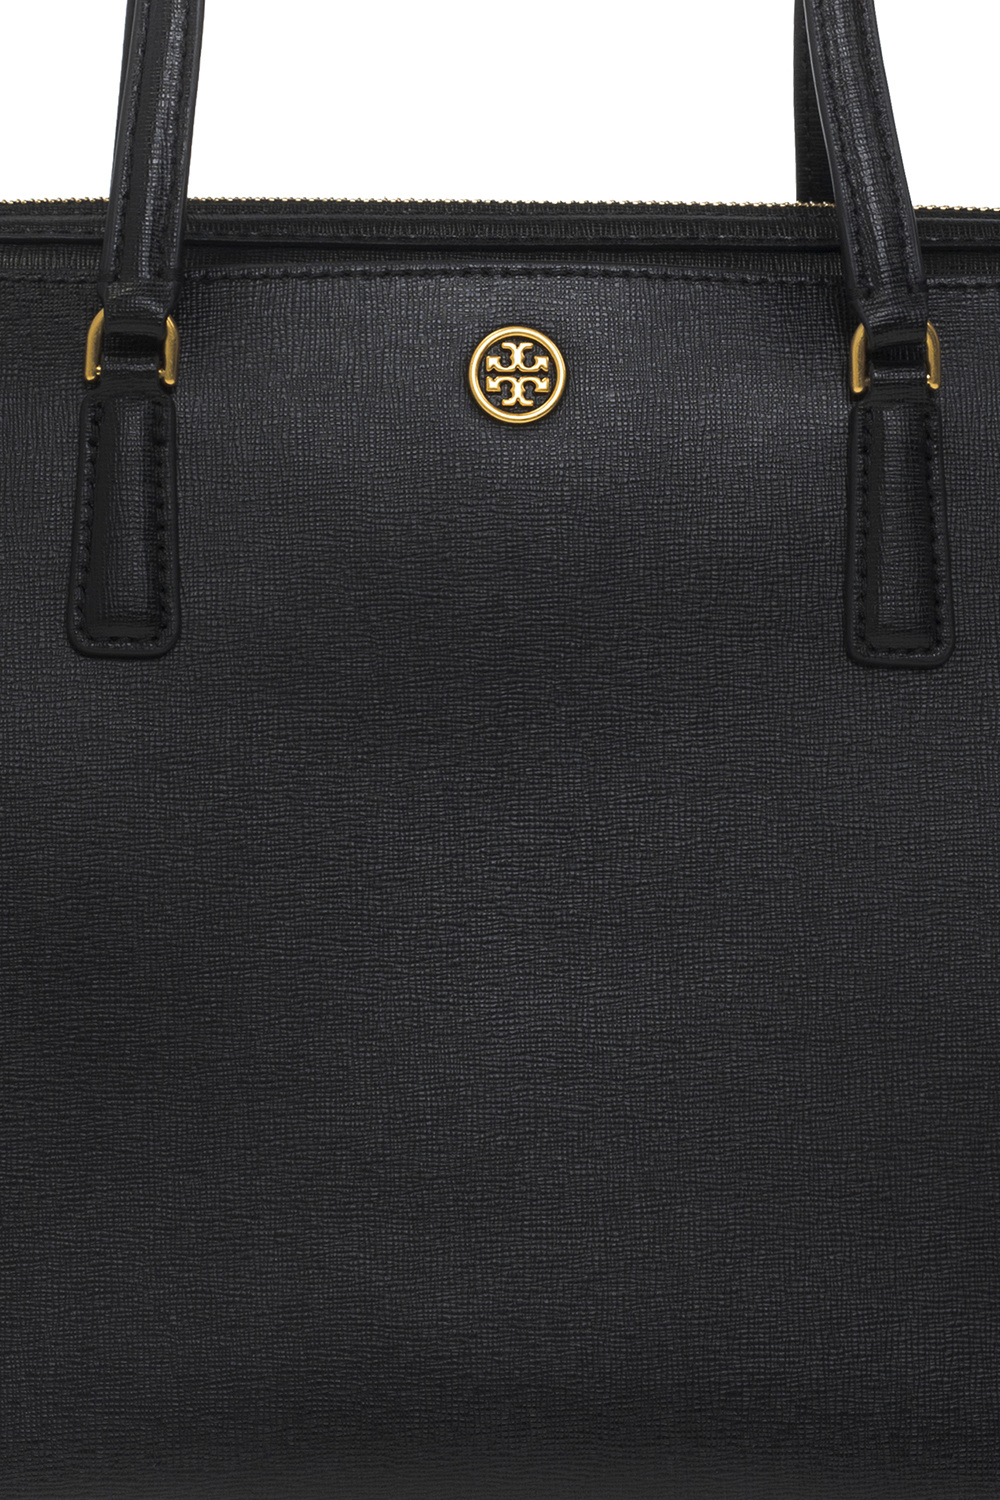 Tory Burch Robinson Small Tote Black One Size